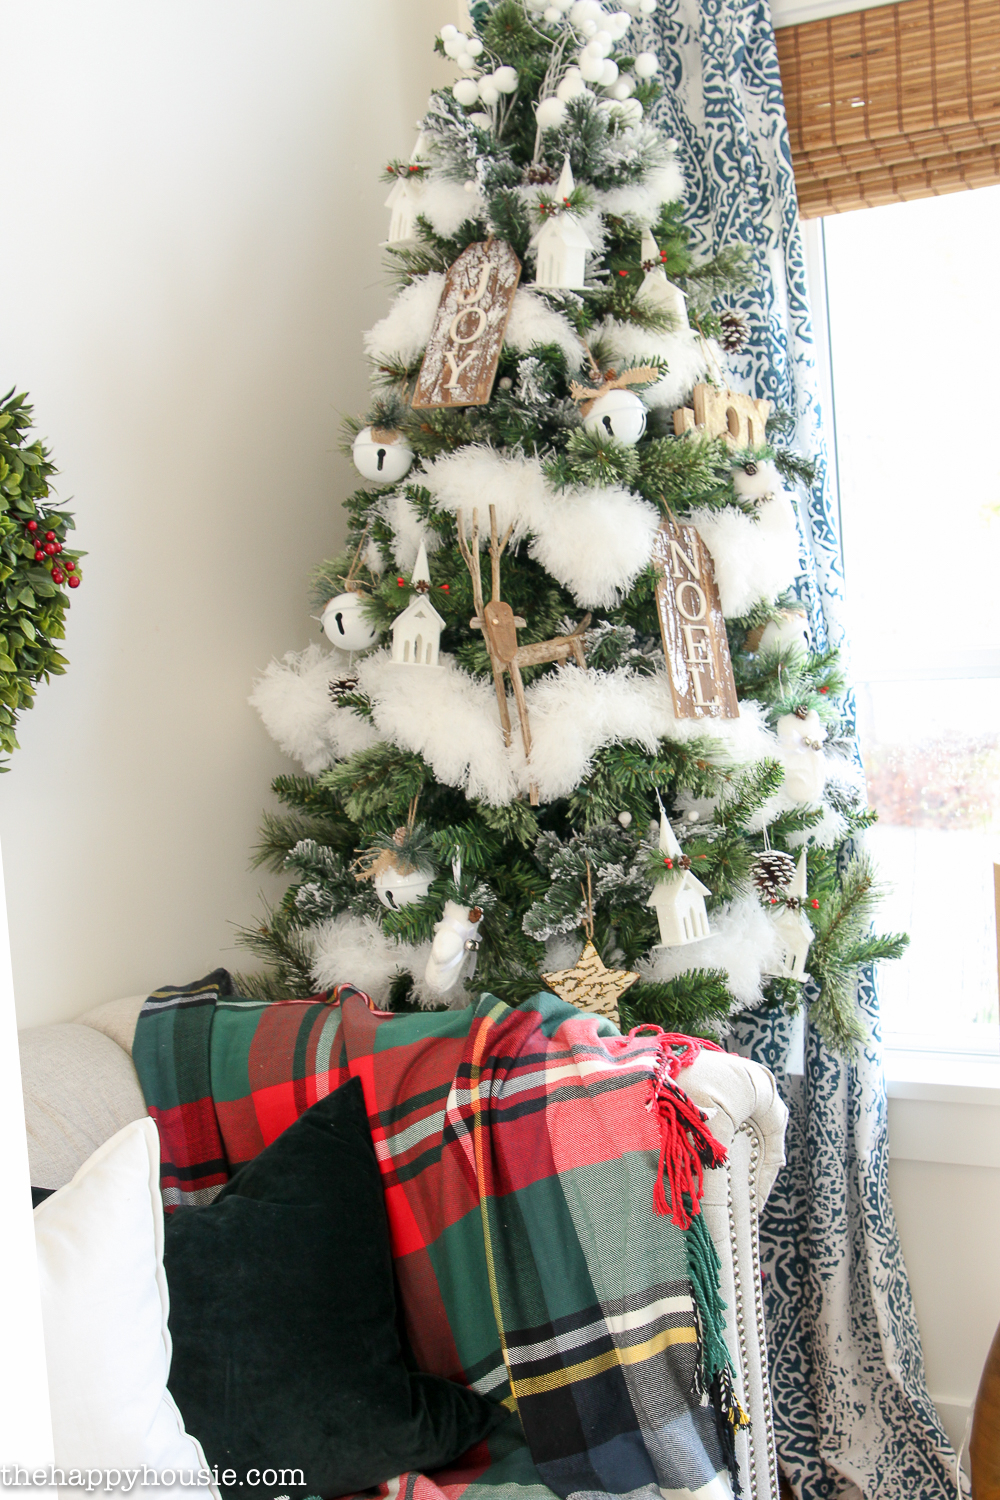 A decorated Christmas tree is in the corner of the room.